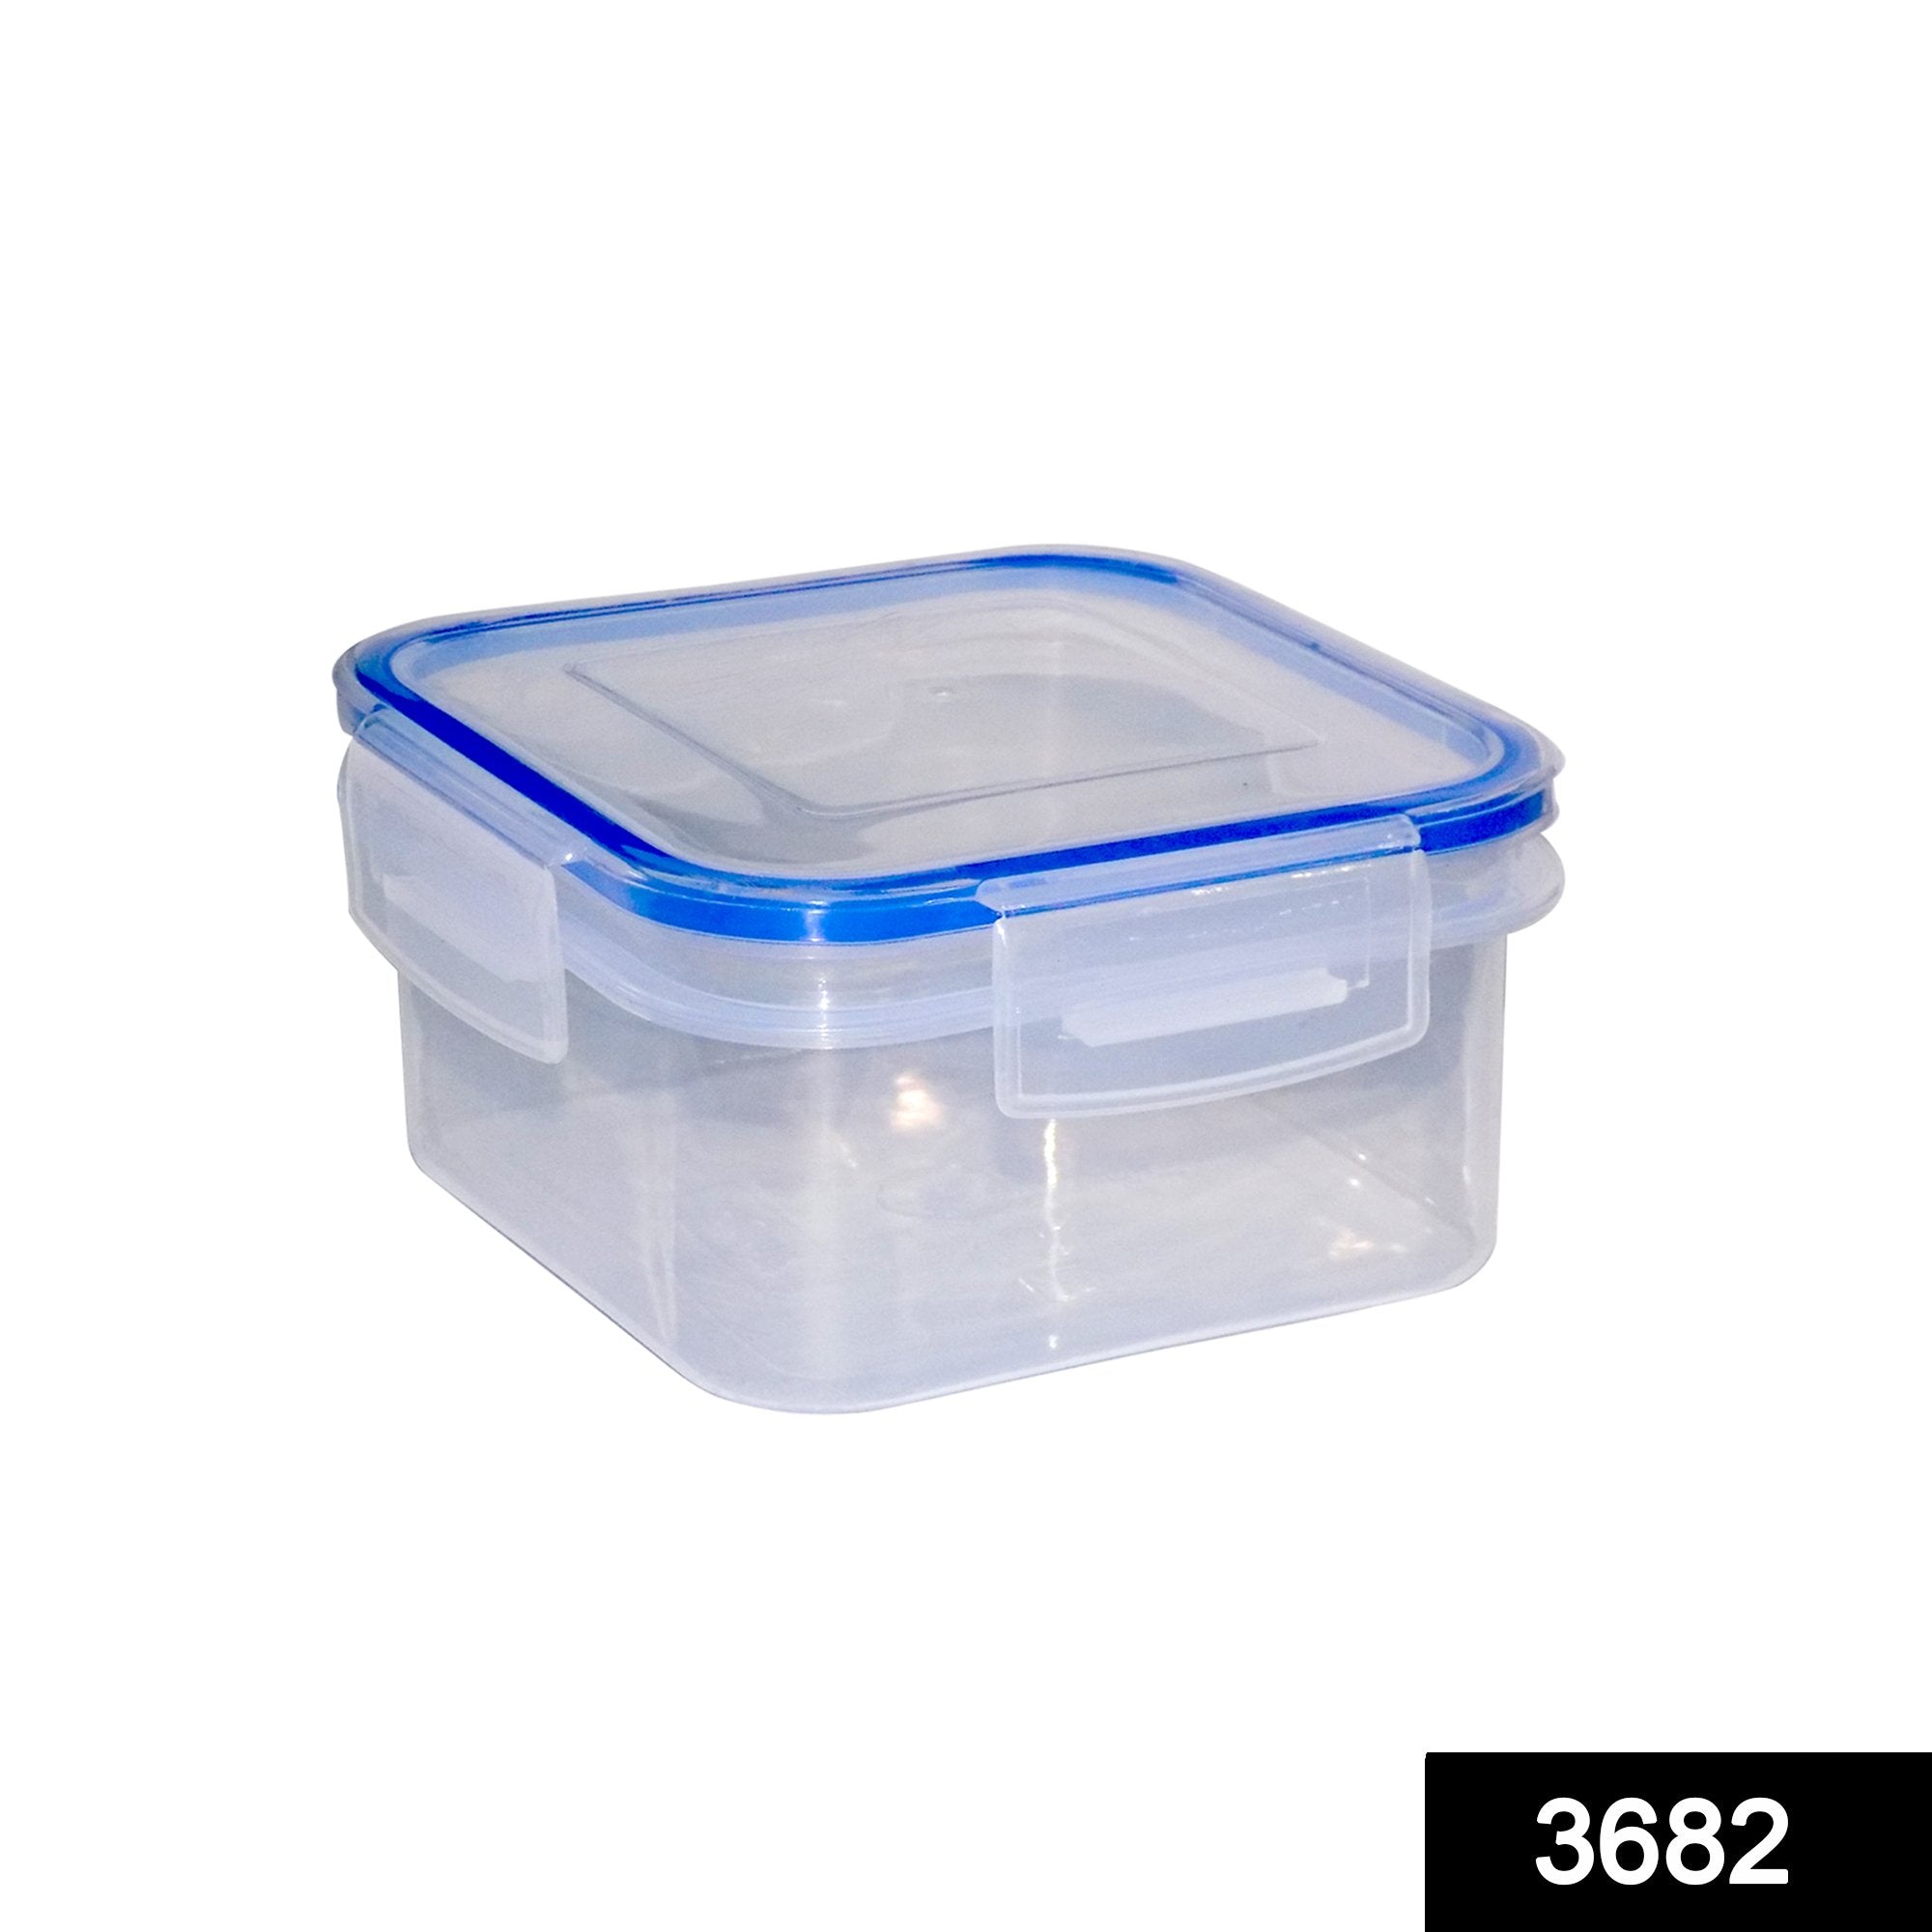 3682 plastic airtight food storage containers for kitchen